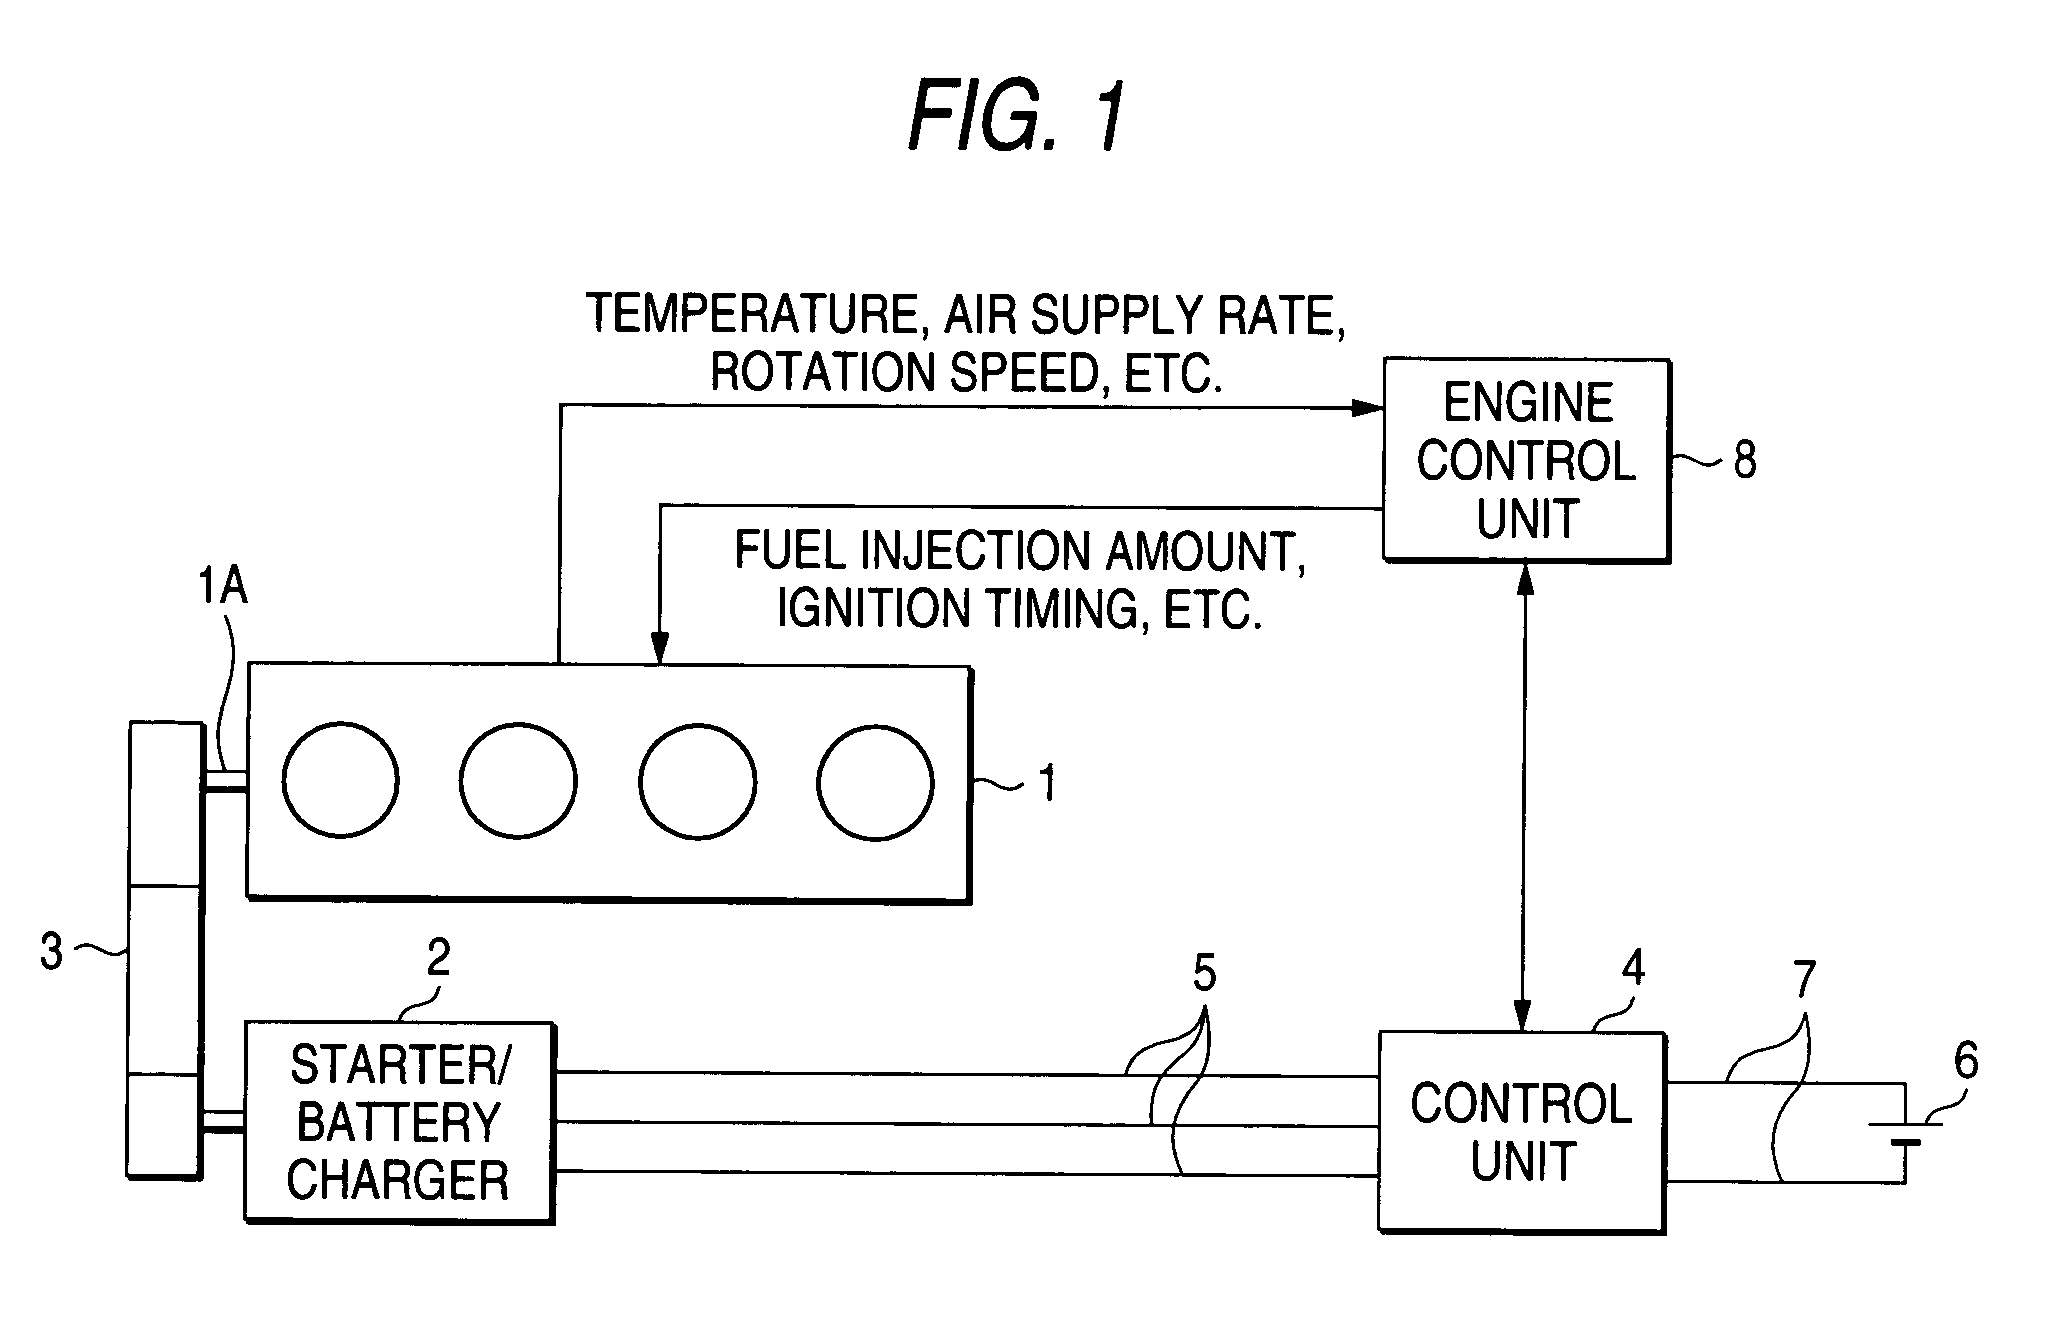 Apparatus and method for preventing an overshoot in the rotation speed of an internal-combustion engine